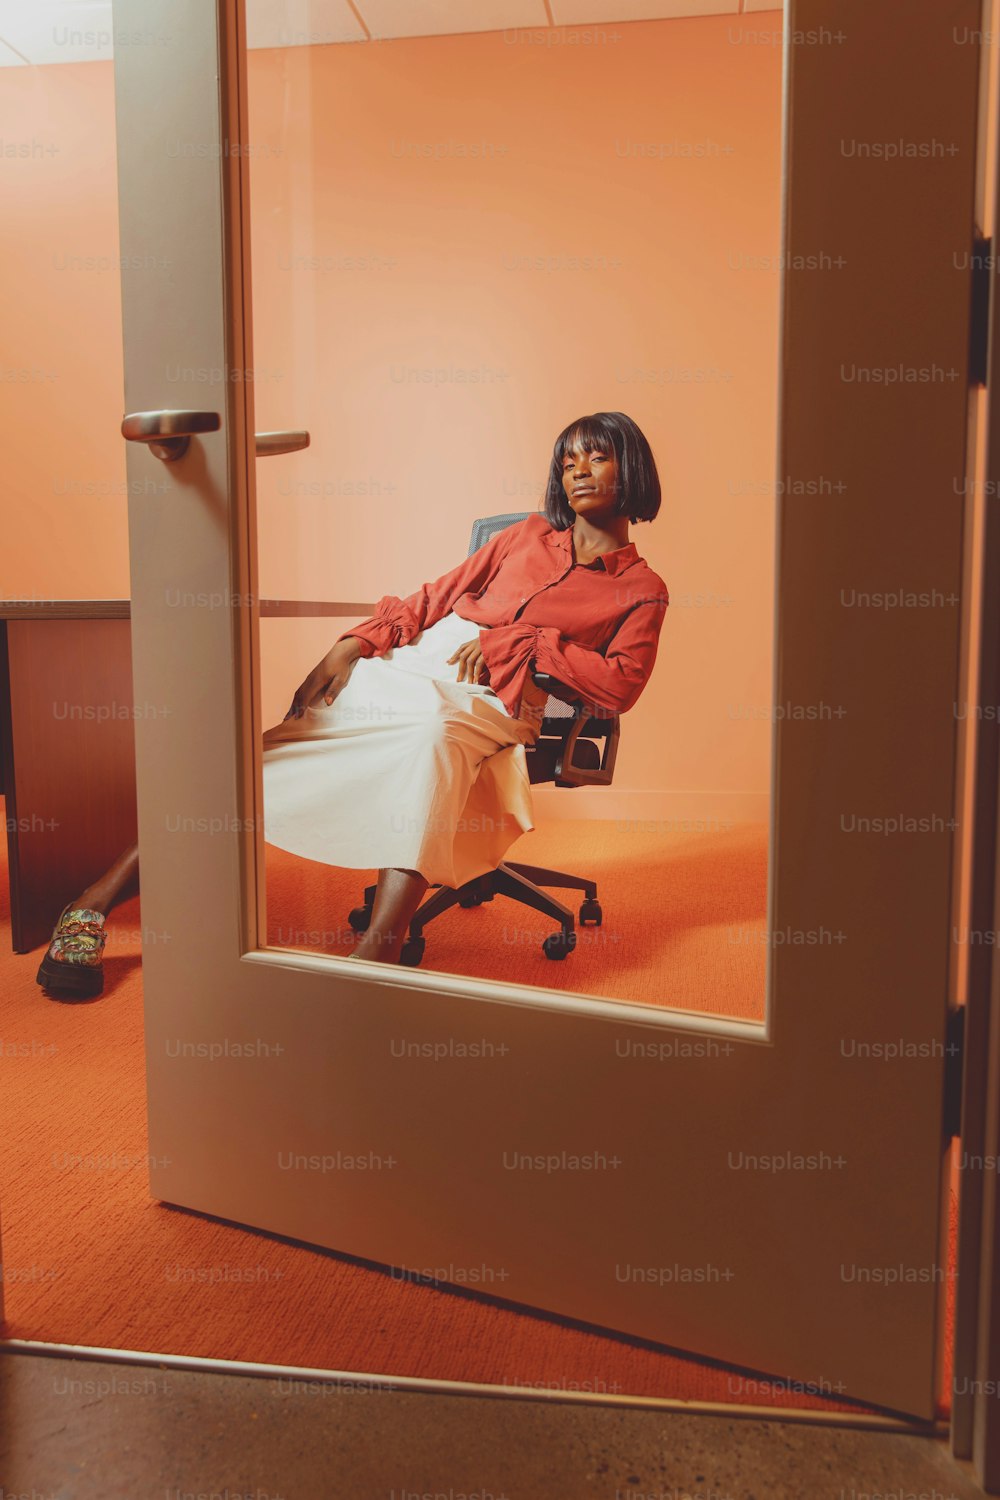 a woman sitting in a chair in an orange room